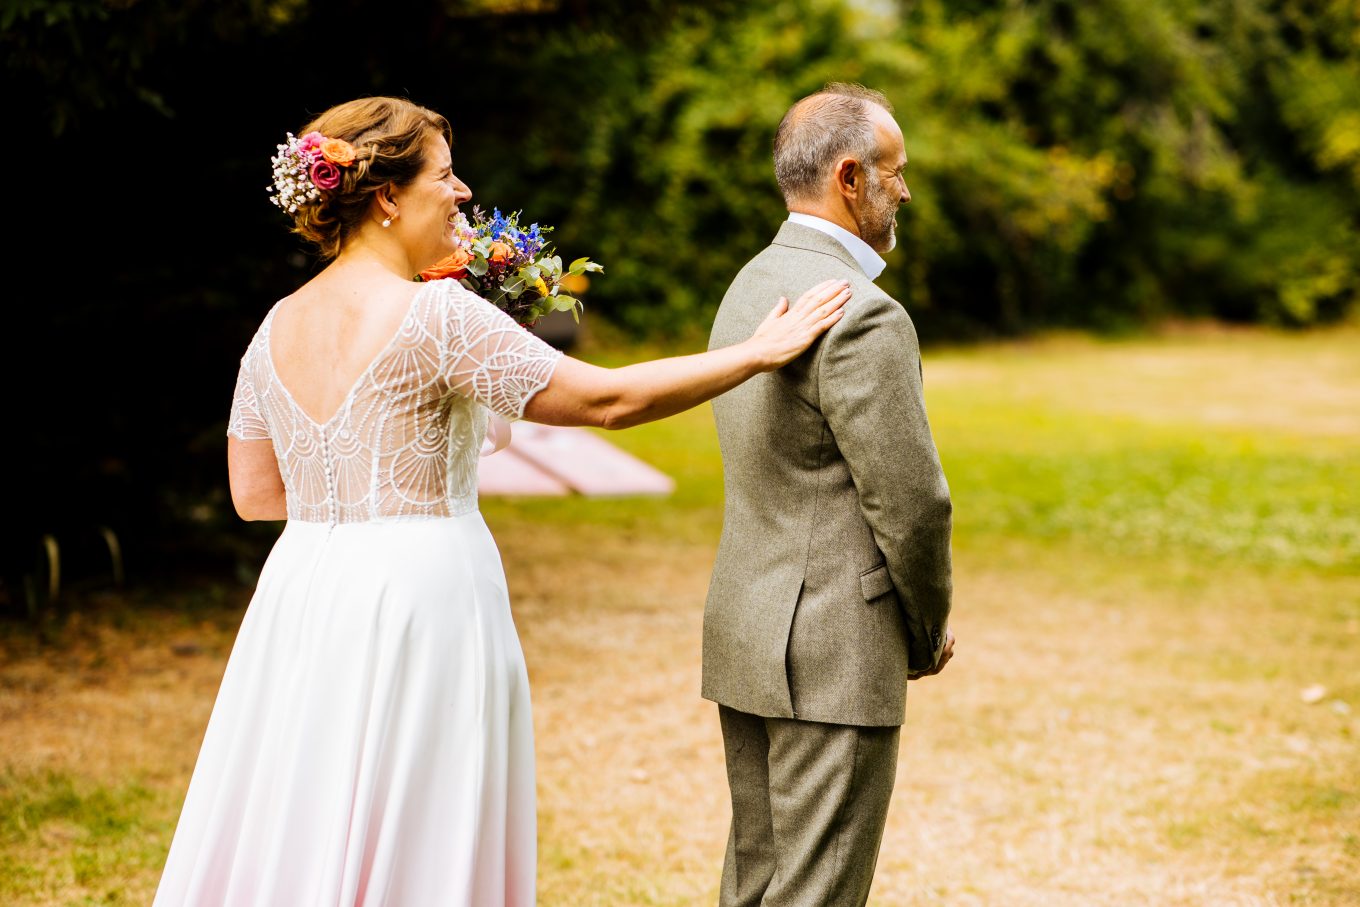 Colourful wedding in Kent